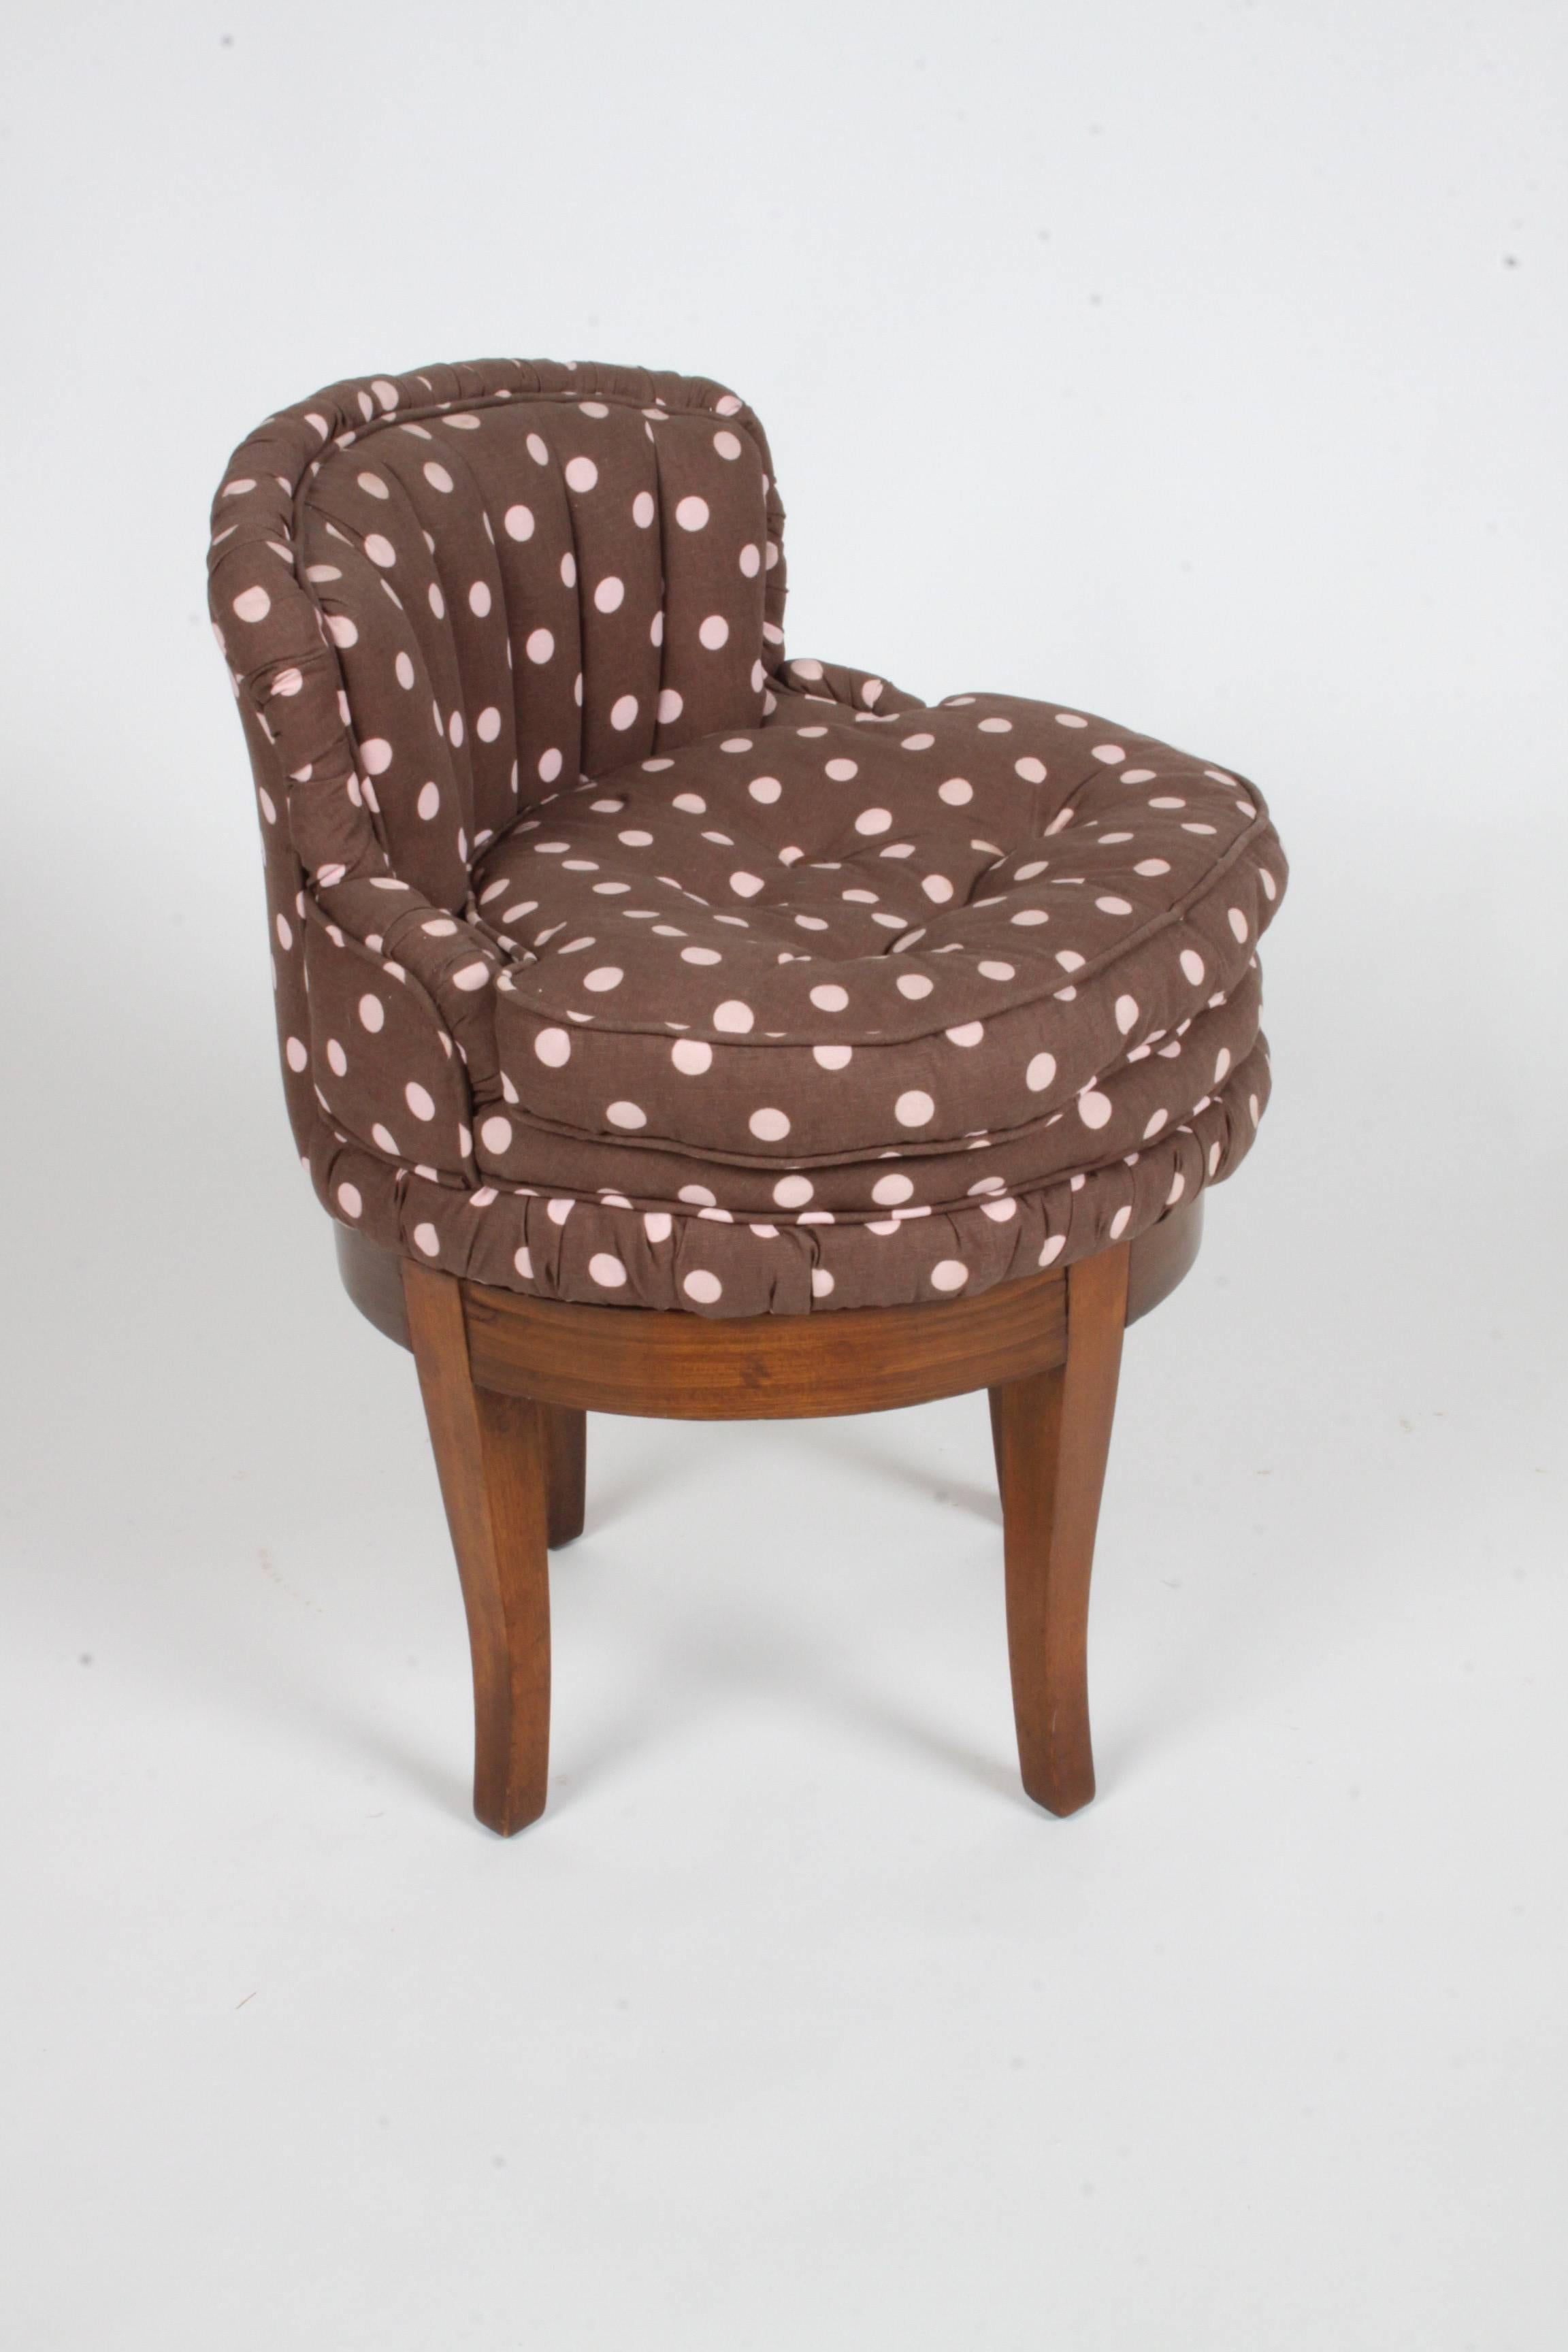 Vintage 1940s Swivel Vanity stool, with tufted polka dot fabric. Legs to be touched up prior to shipping. Fabric is clean, but may want to update. 
Seat depth 15.5